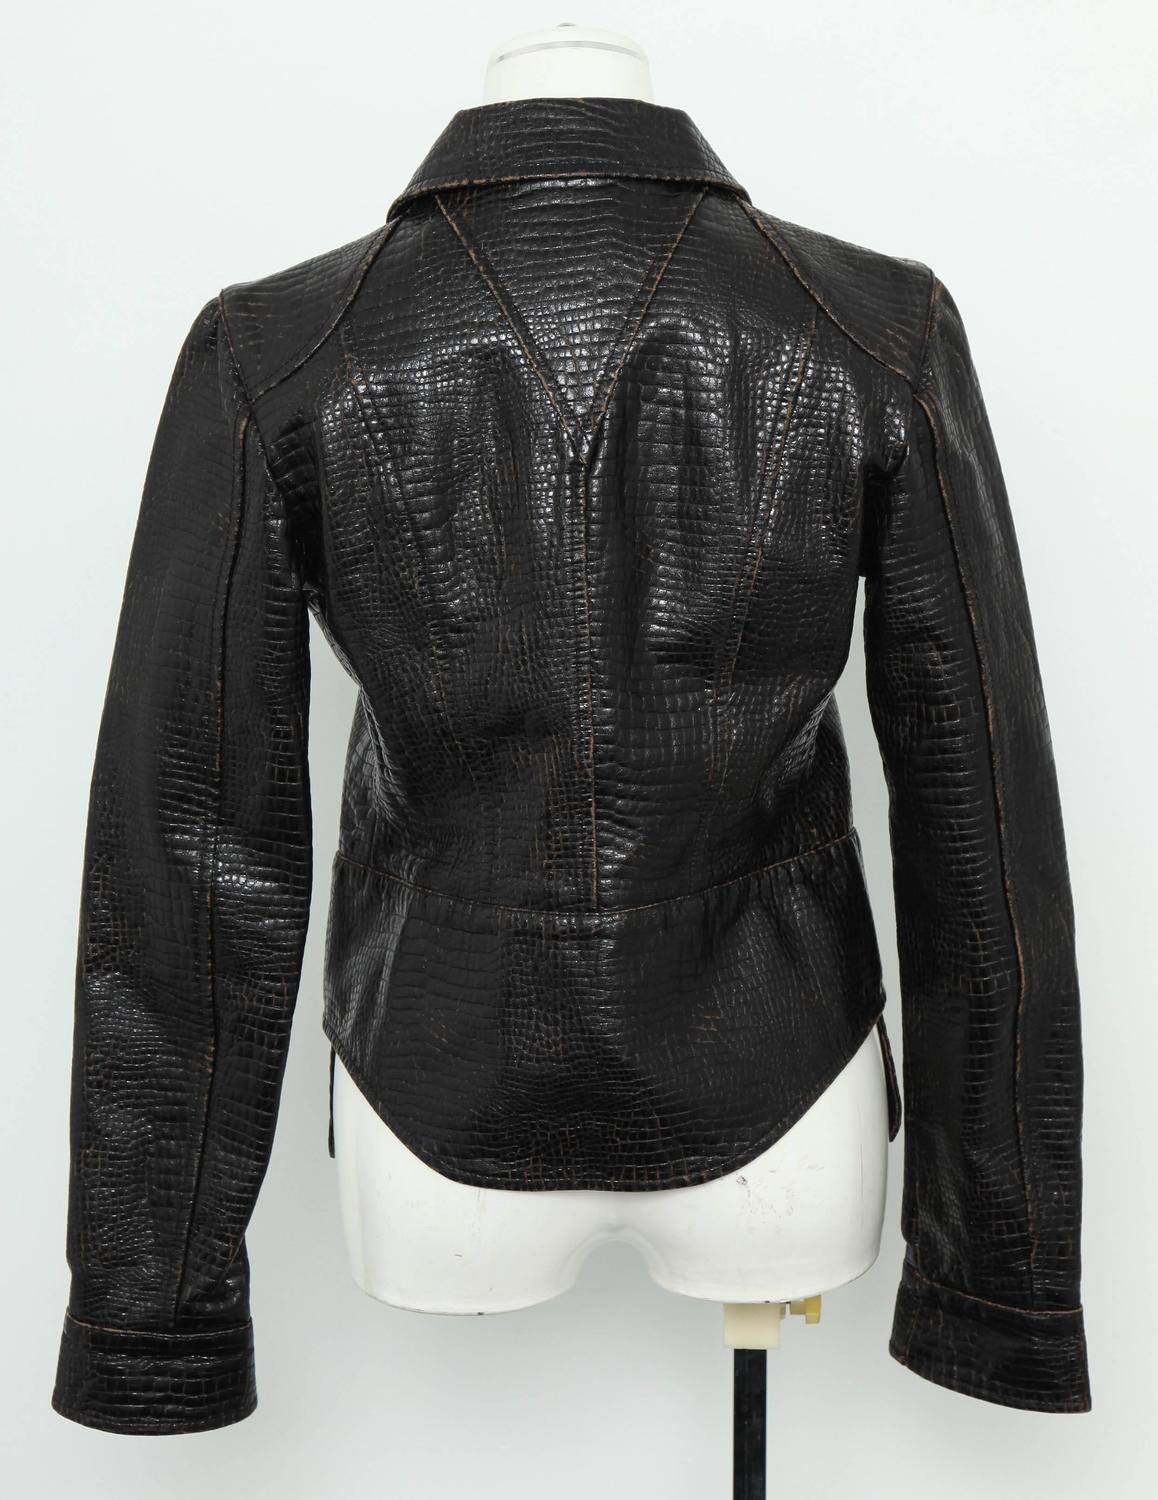 Chanel Rare Croc Embossed Vegan Leather Jacket As Seen On Runway For ...